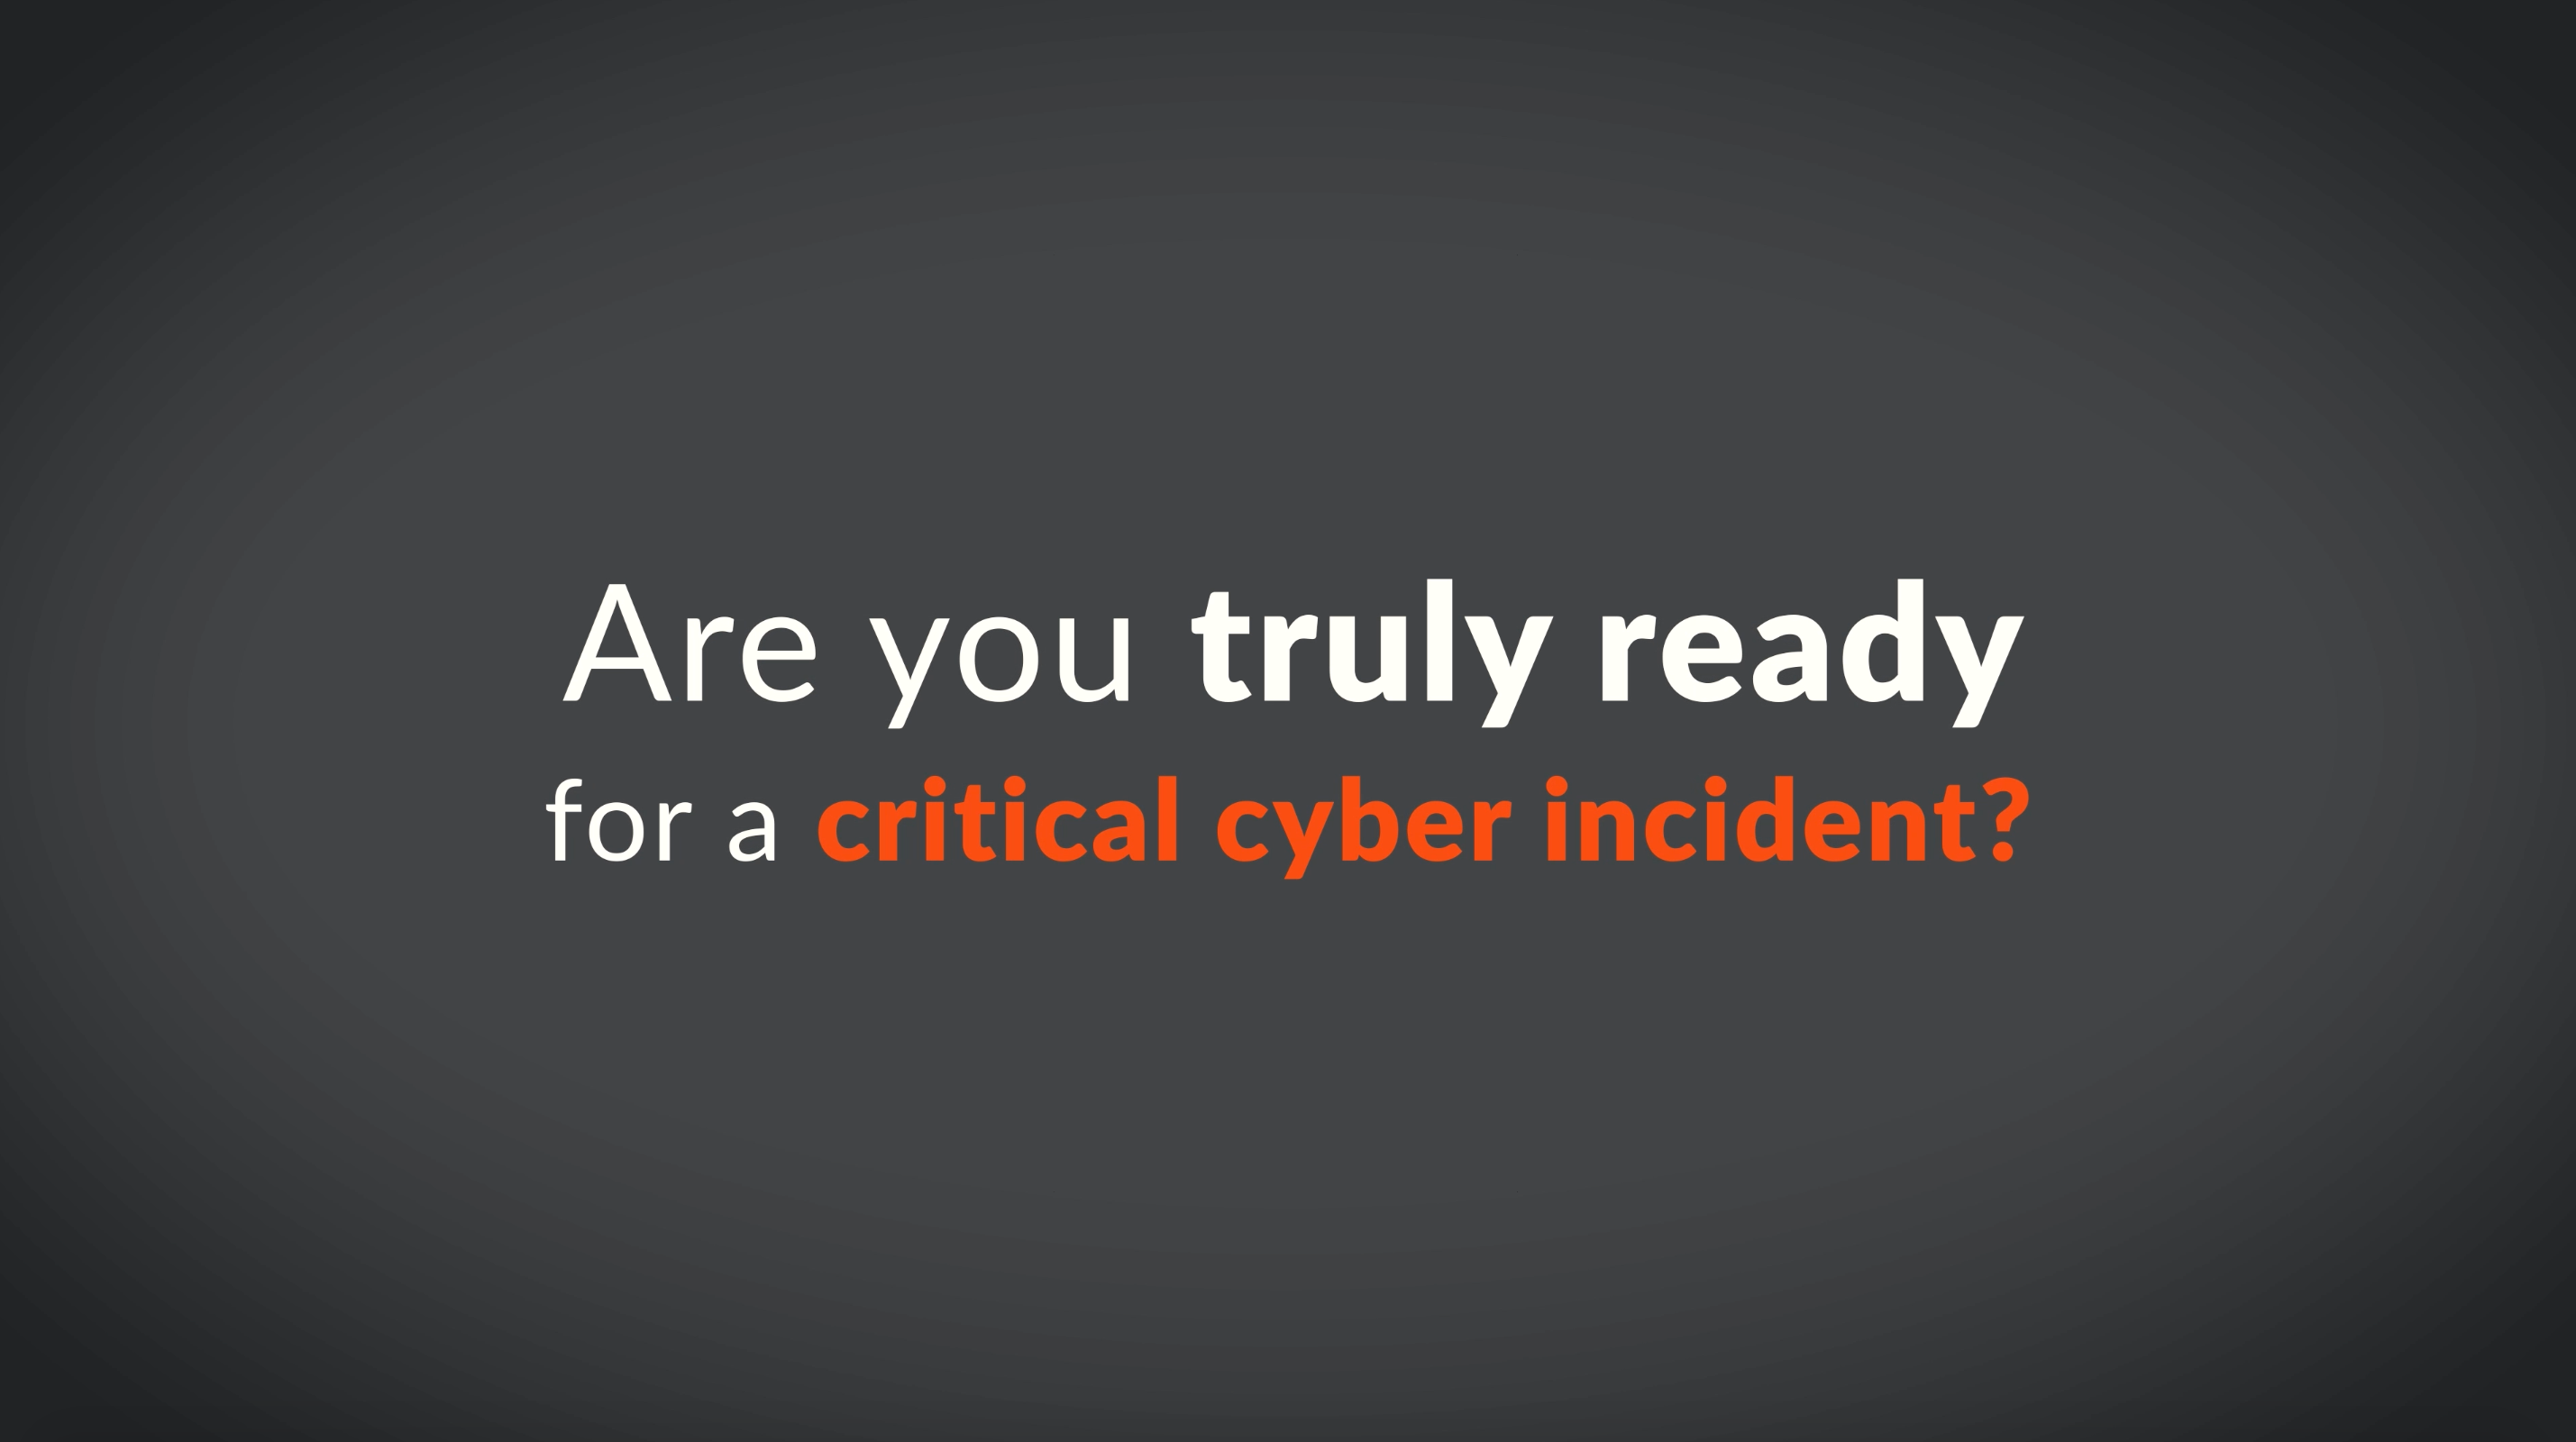 Are you truly ready for a critical cyber incident?